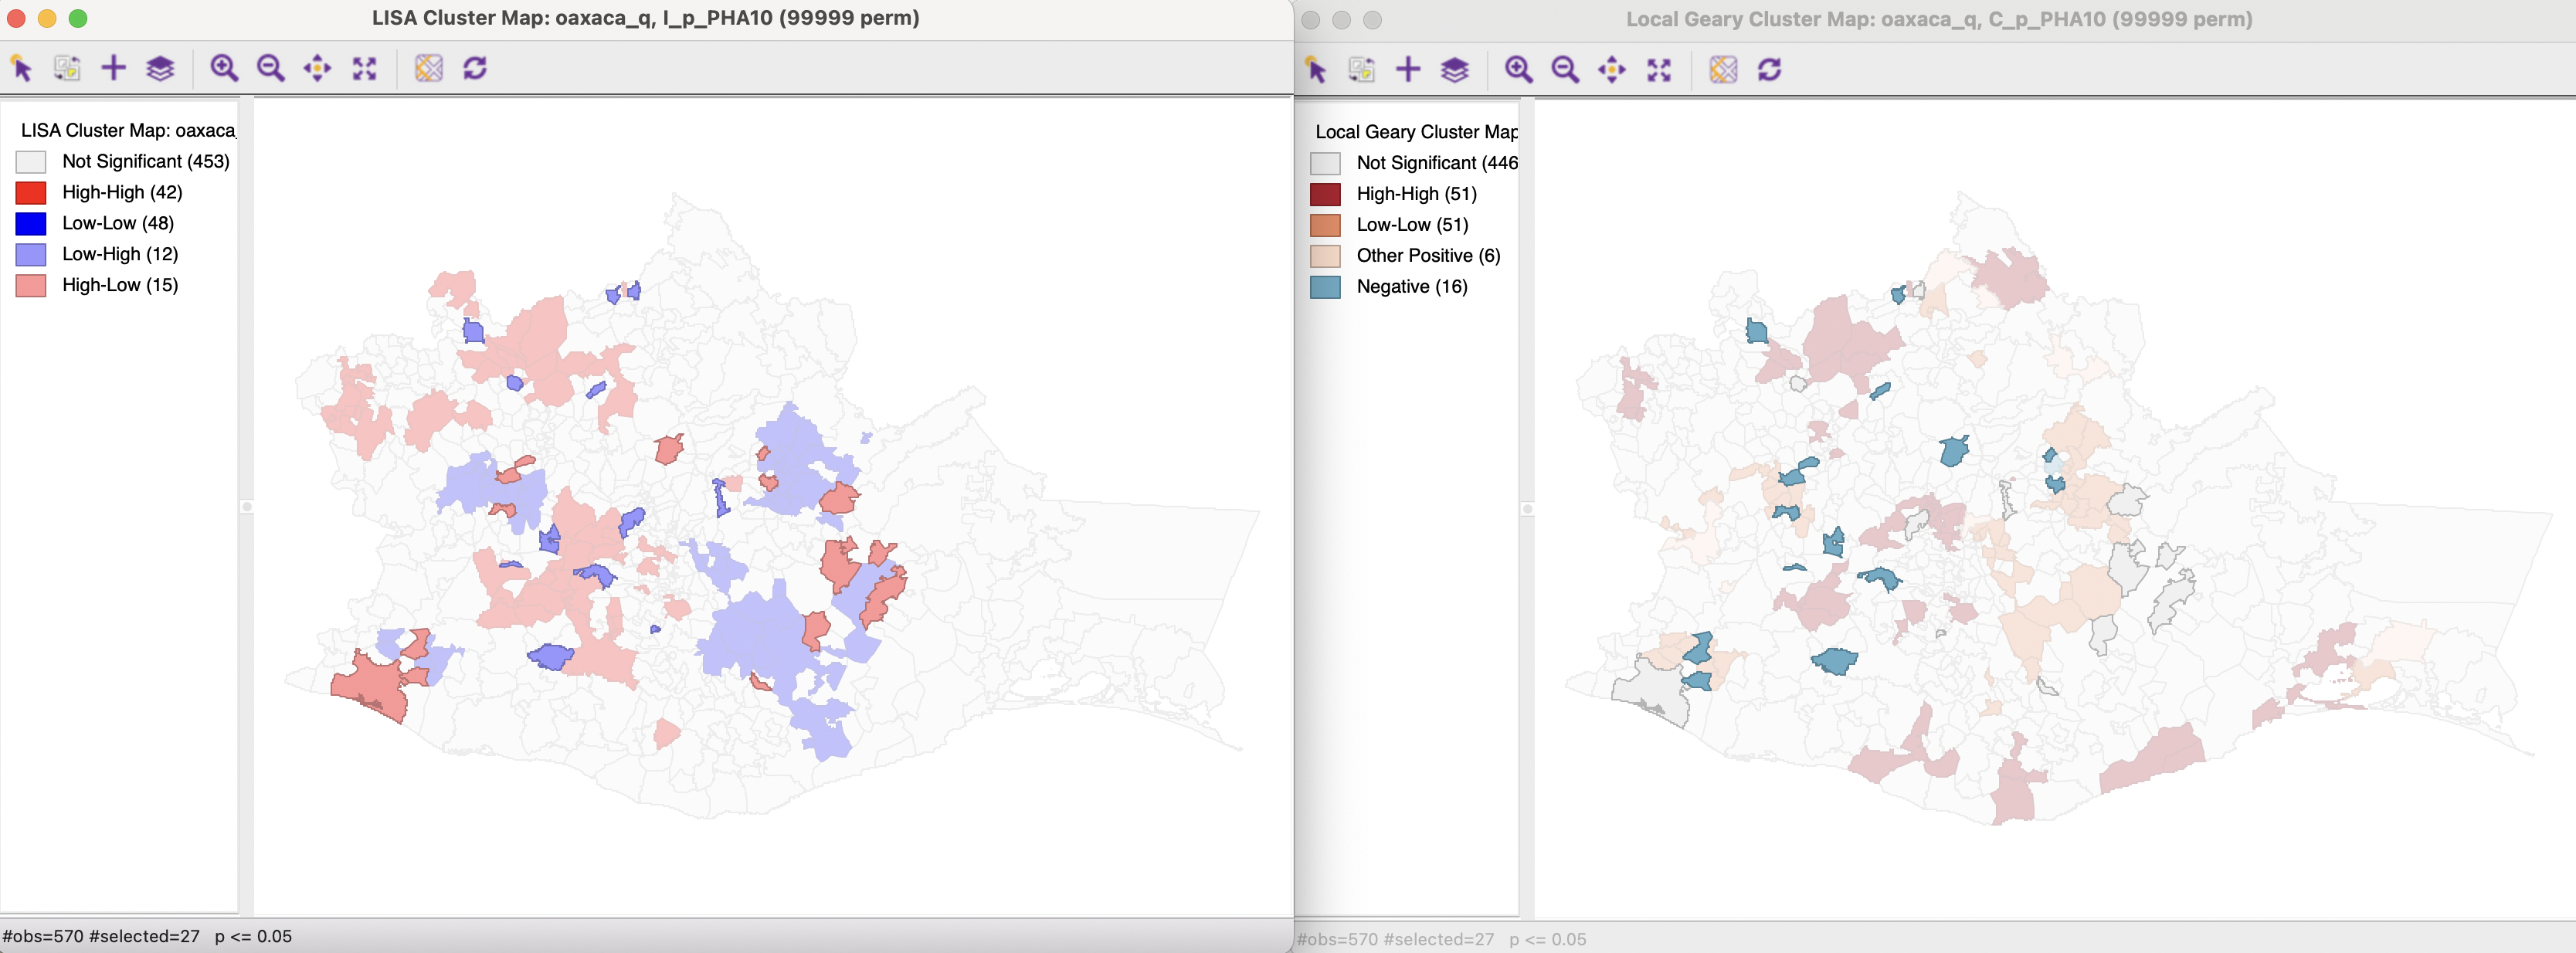 Local Moran and Local Geary - spatial outliers